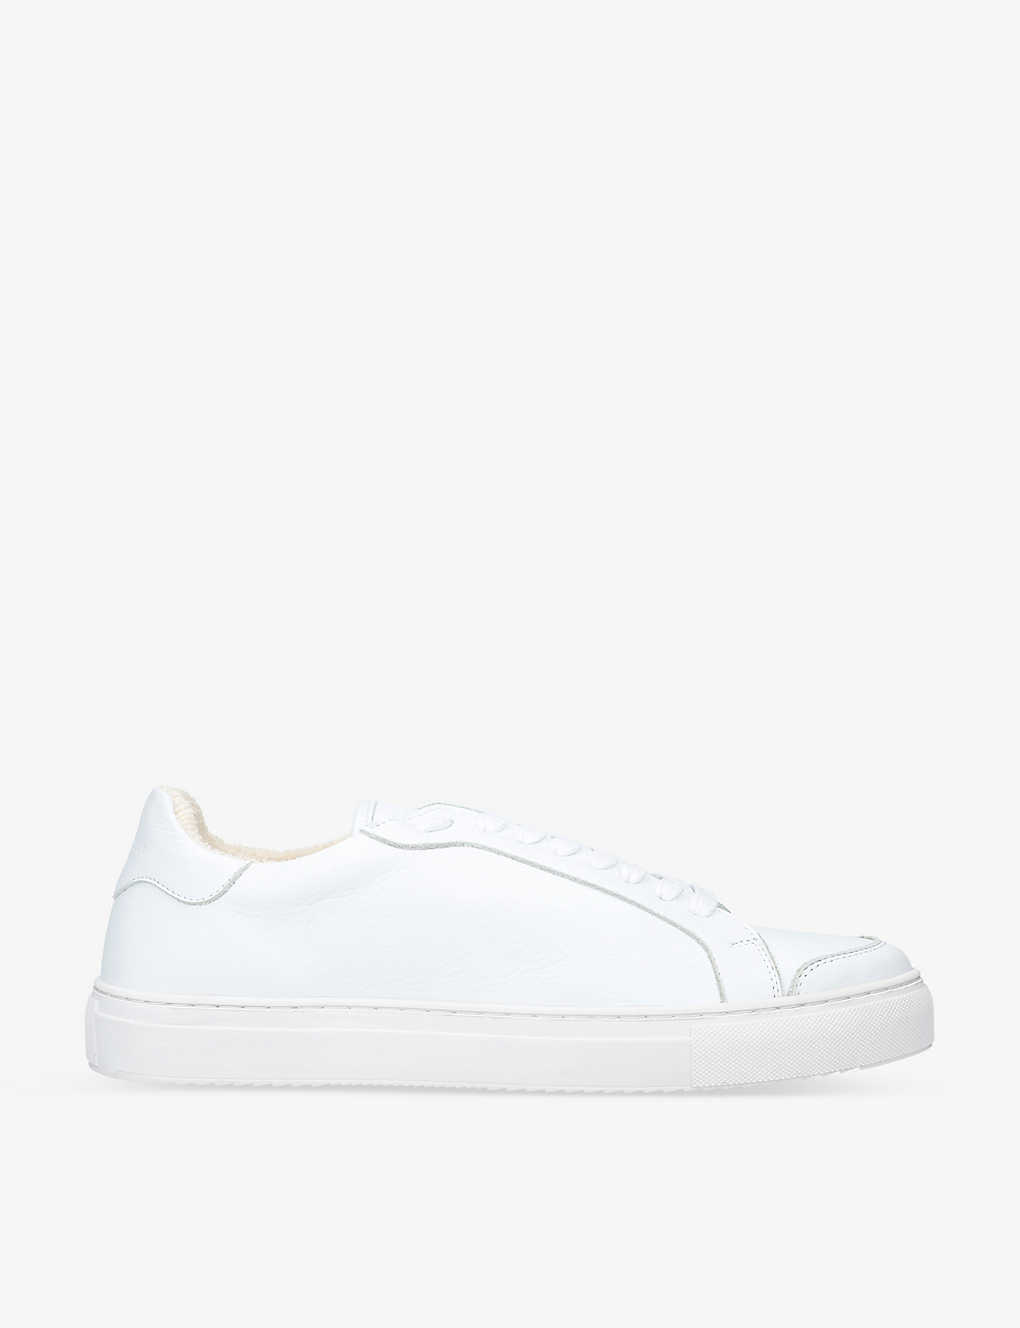 Duke & Dexter Otis Towel-lined Leather Trainers In White